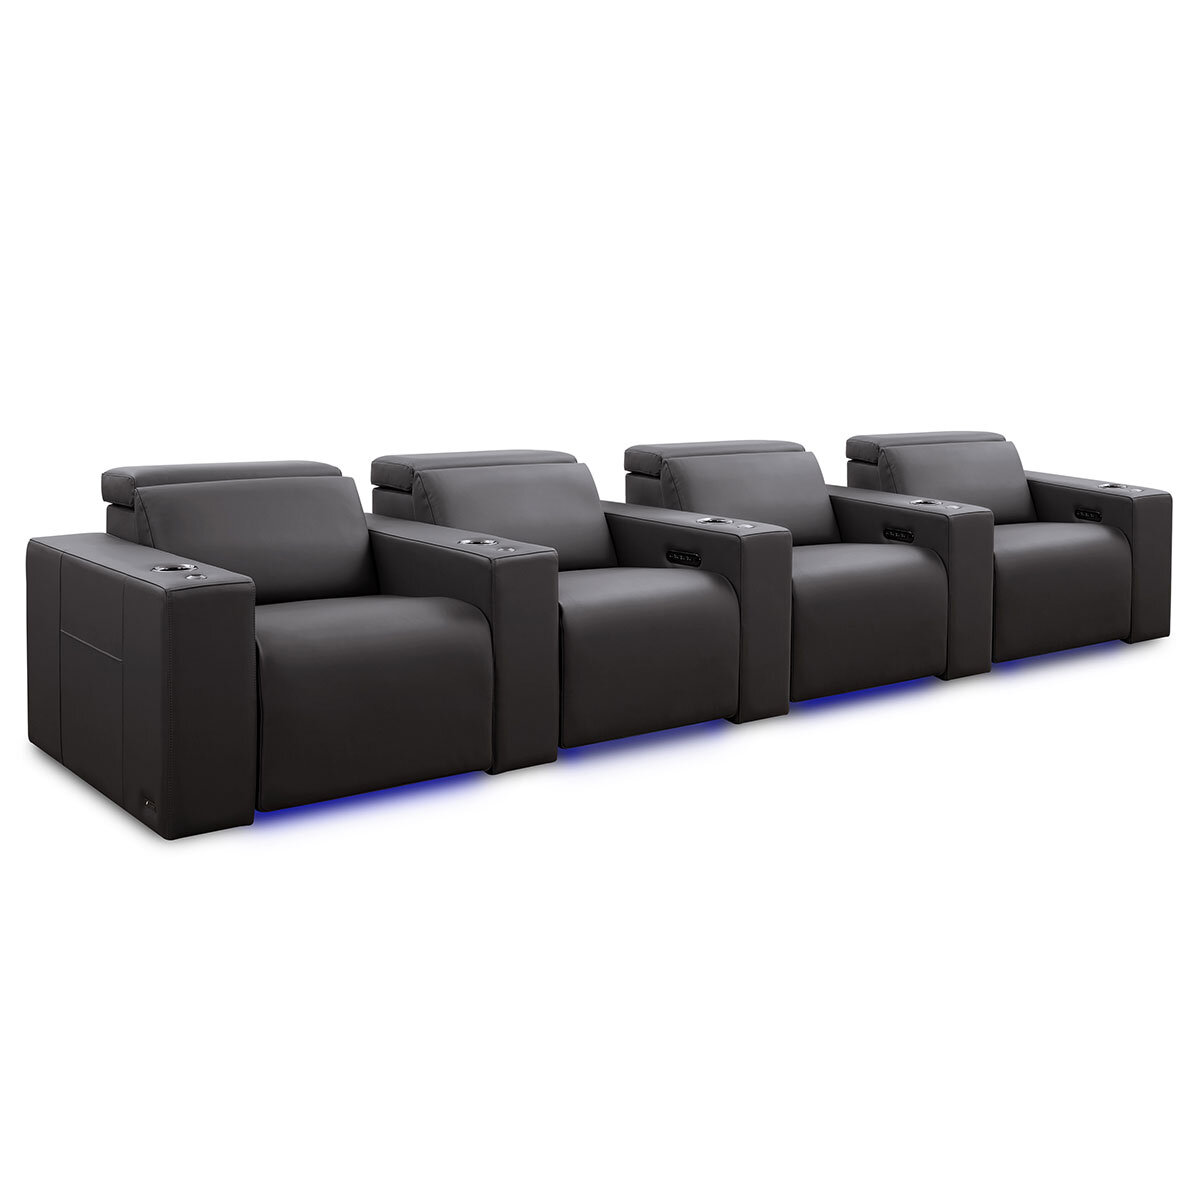 Valencia Barcelona Row of 4 Black Power Reclining Home Theatre Seating